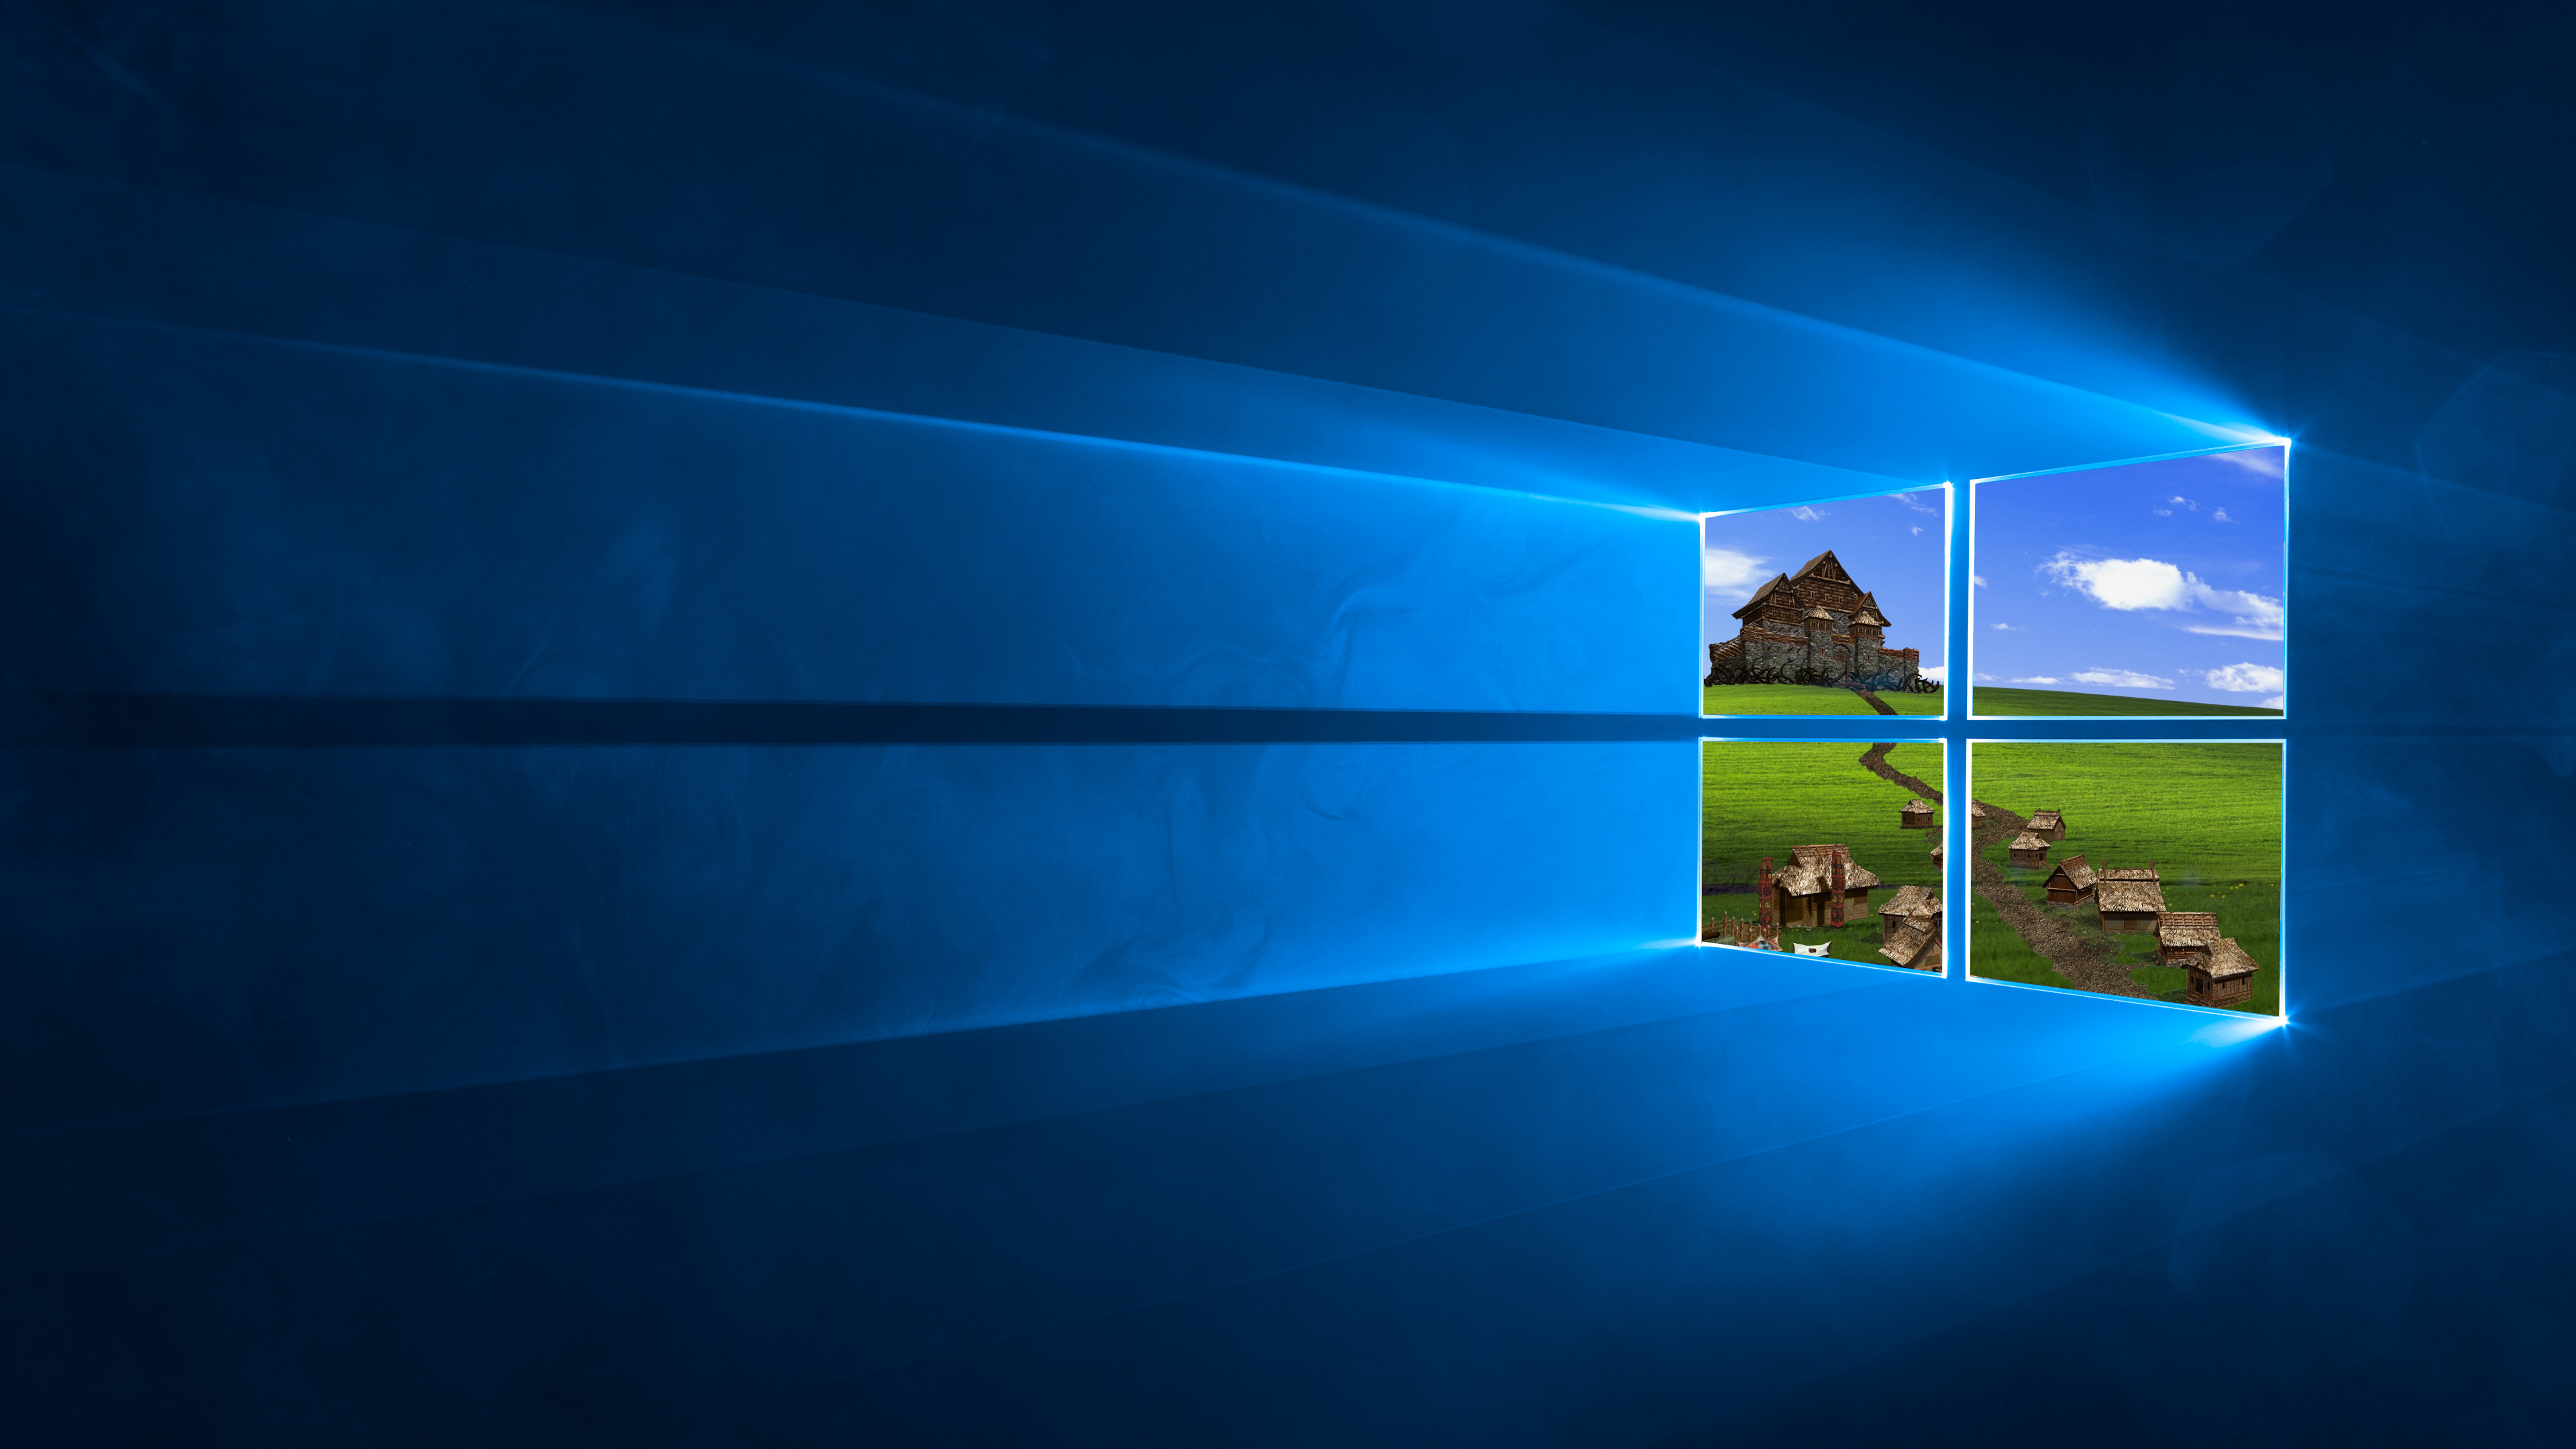 Windows 10 Landscape Windows XP Heroes Of Might And Magic Microsoft 3840x2160